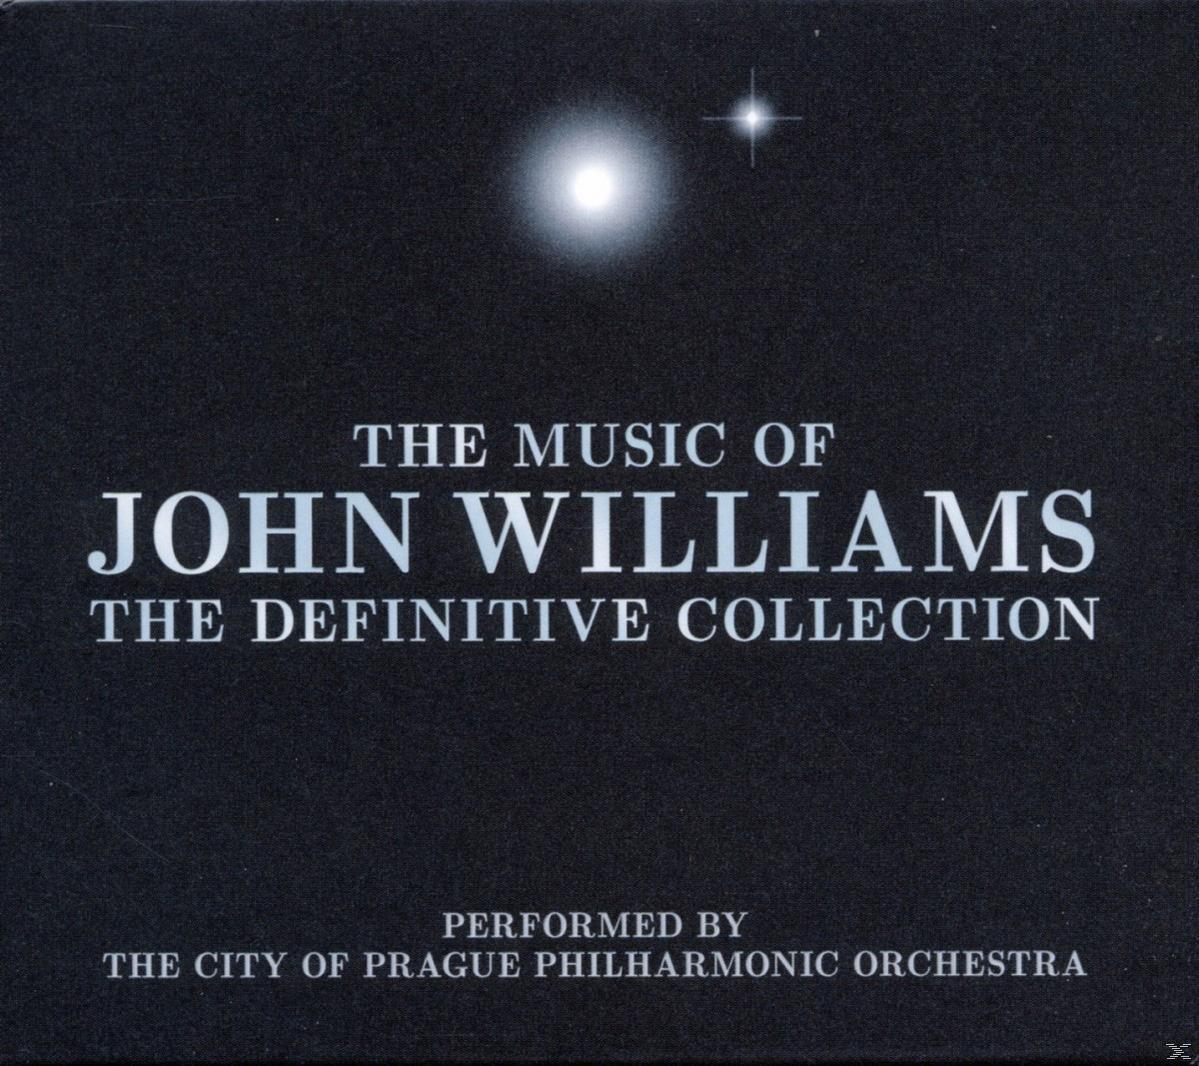 The City Of Prague Philharmonic Music (CD) John Music The Definitive Collection Jazz Works, Of - - London - Williams Orchestra The N.Y. Orchestra